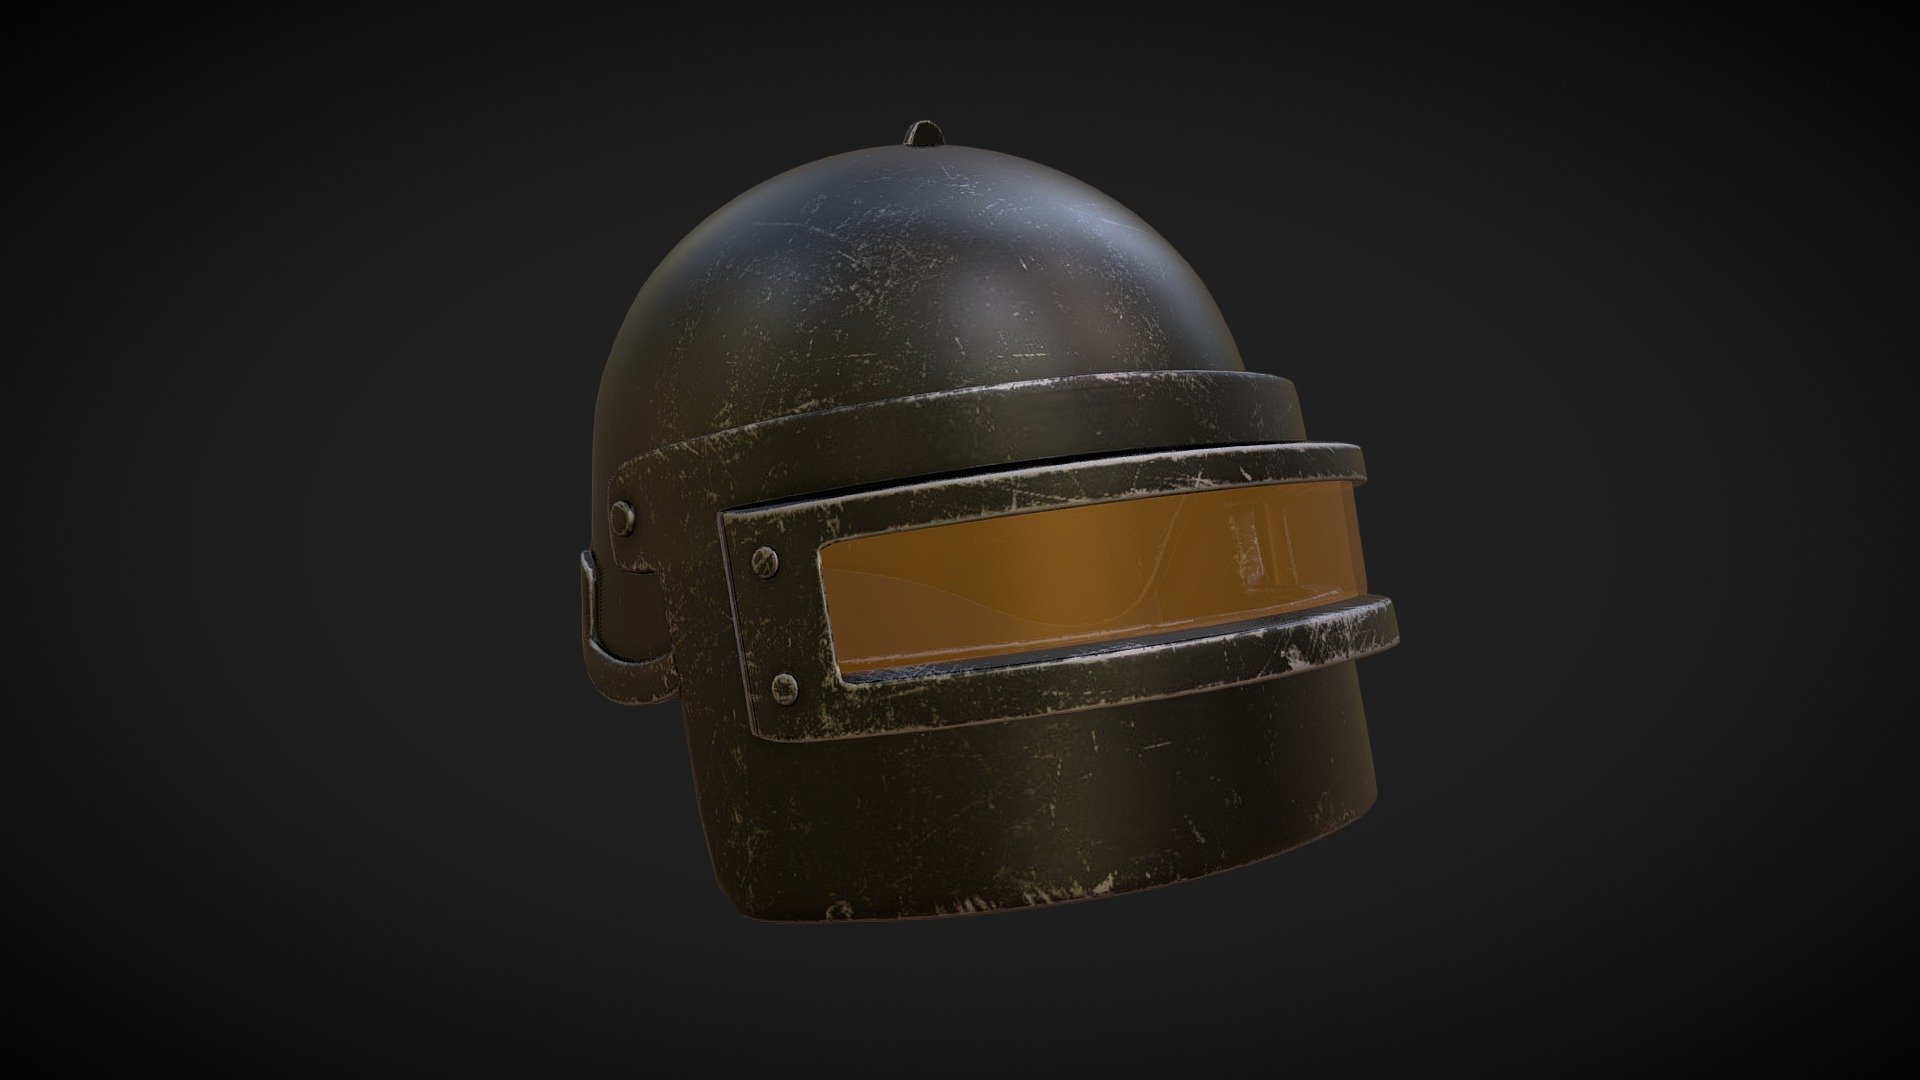 PUBG Level 3 Helmet from PUBG by Nikolas Antonio made by Blender and Substance Painter.
Dont forget to give a like ! - PUBG Level 3 Helmet - Download Free 3D model by NikolasAntonio 3d model